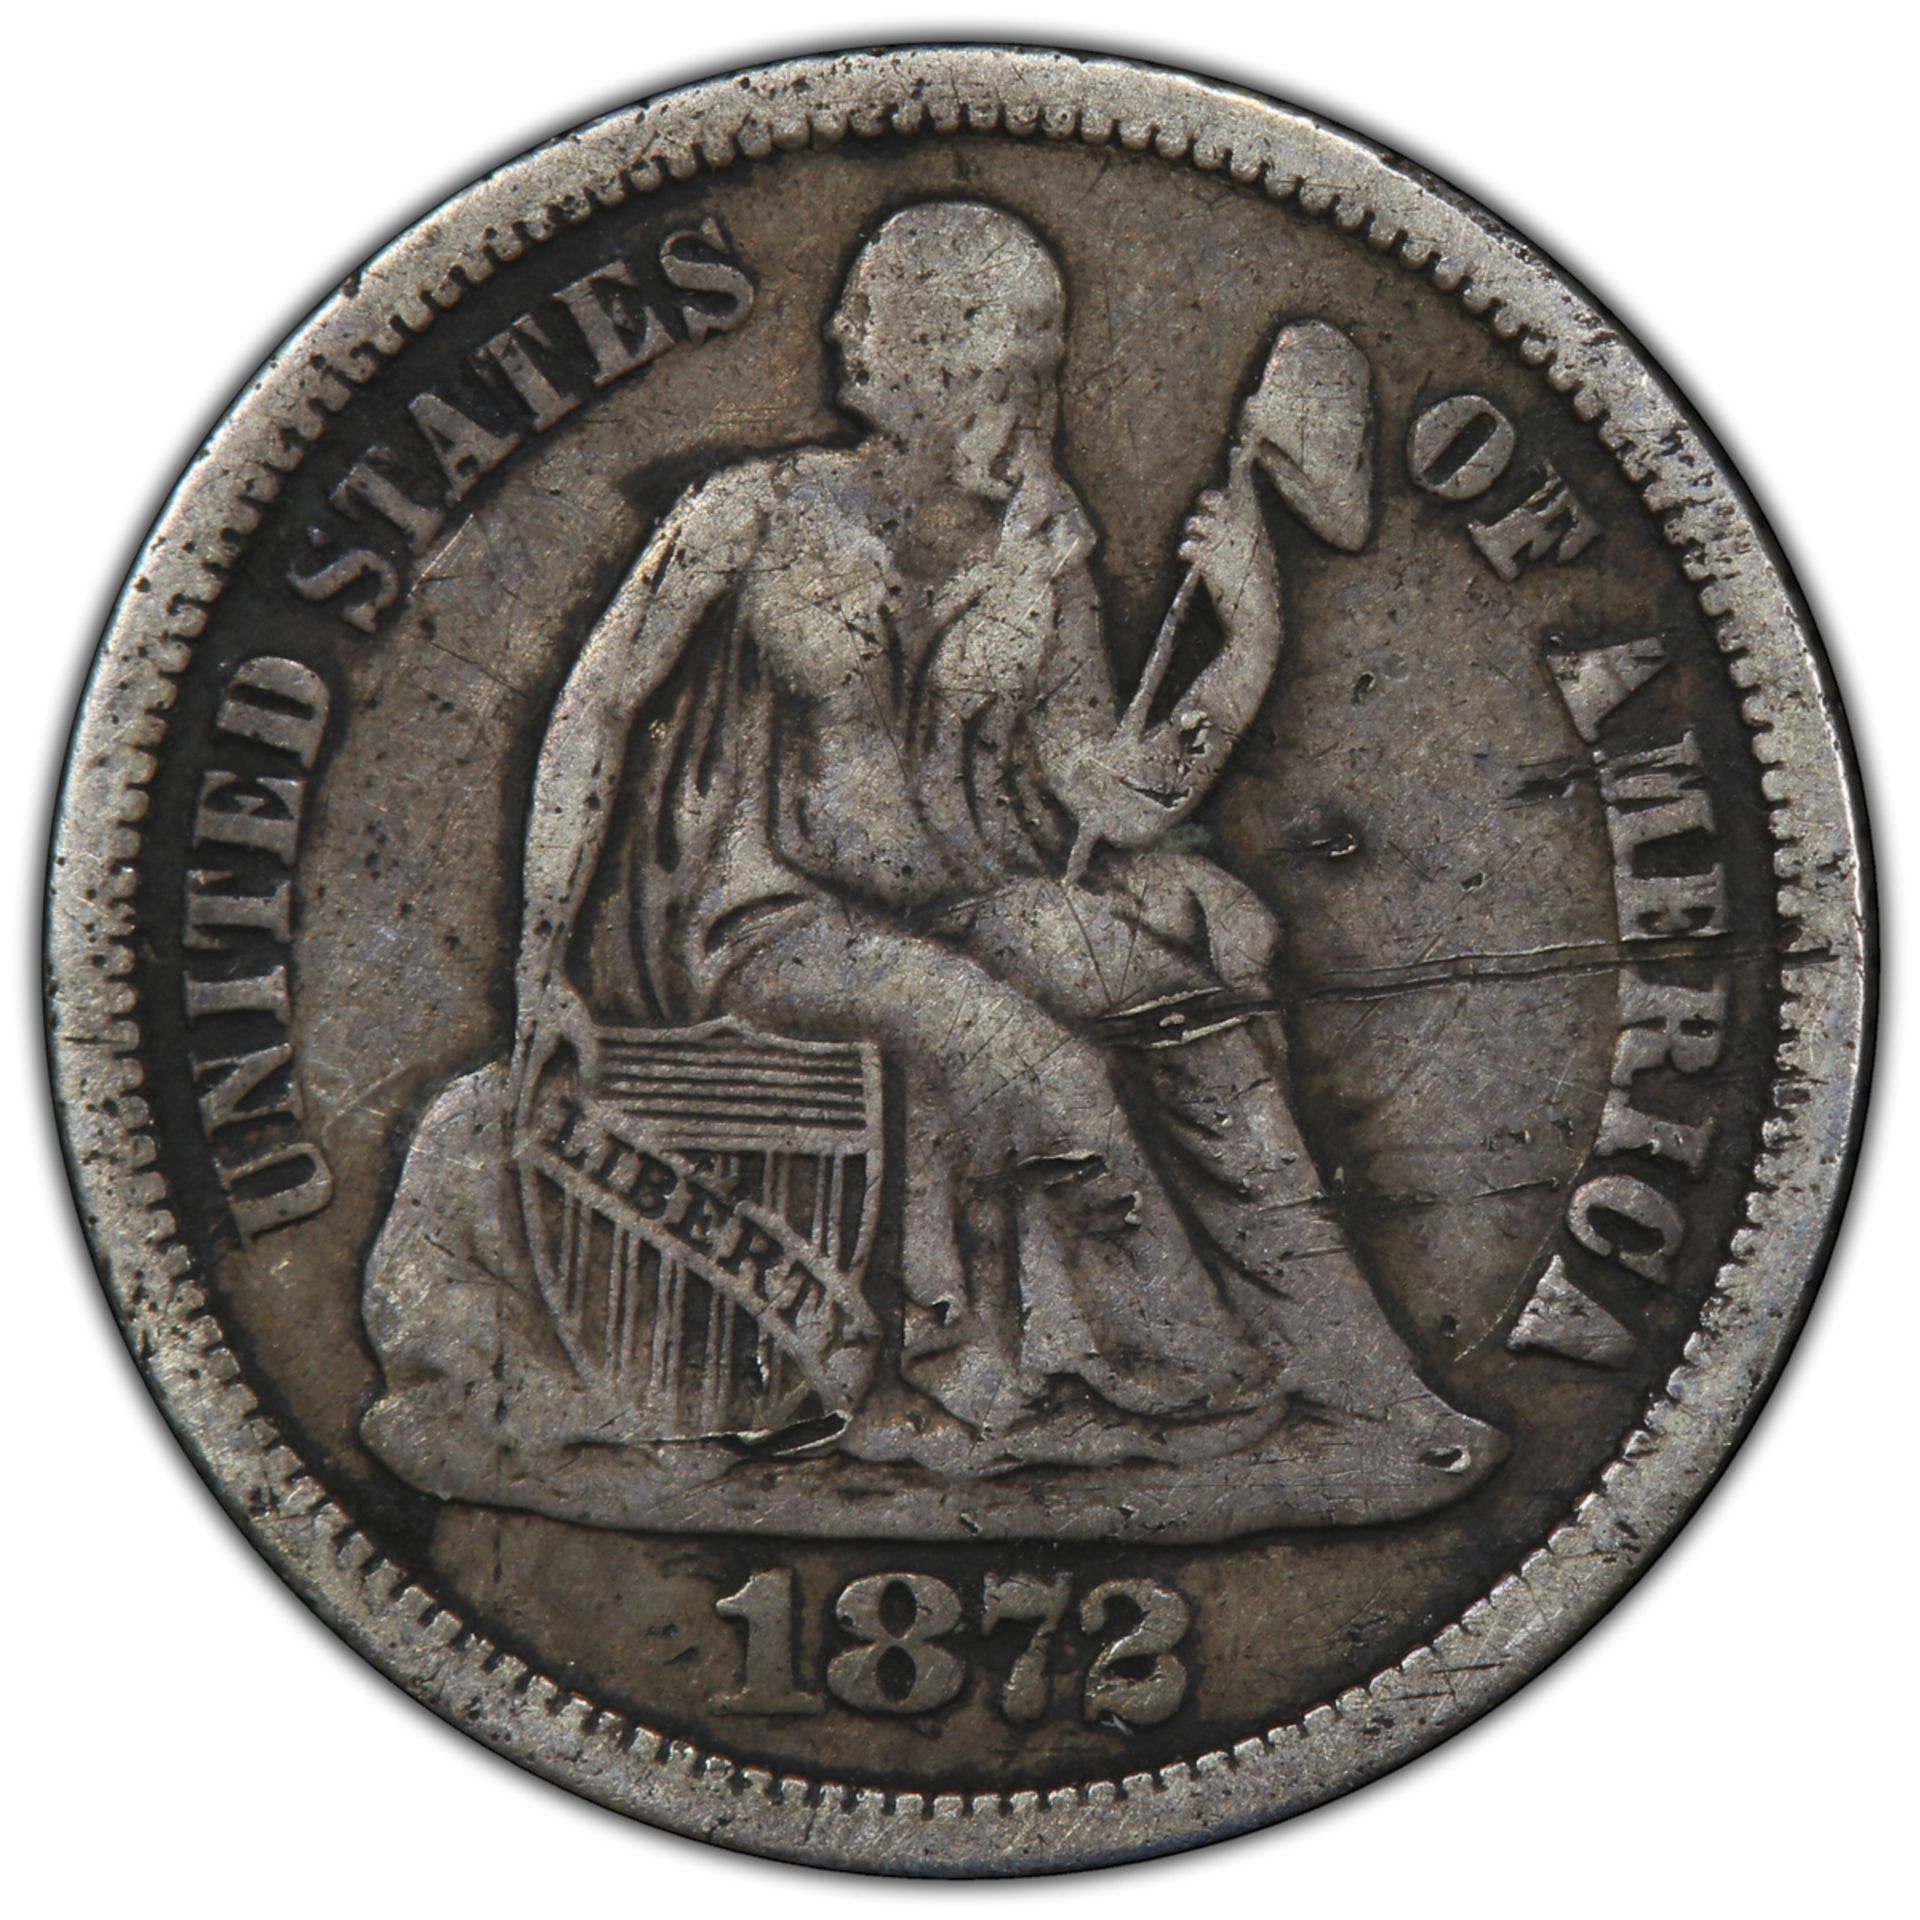 1872 CC Seated Liberty Dime VF PCGS - Image 2 of 4